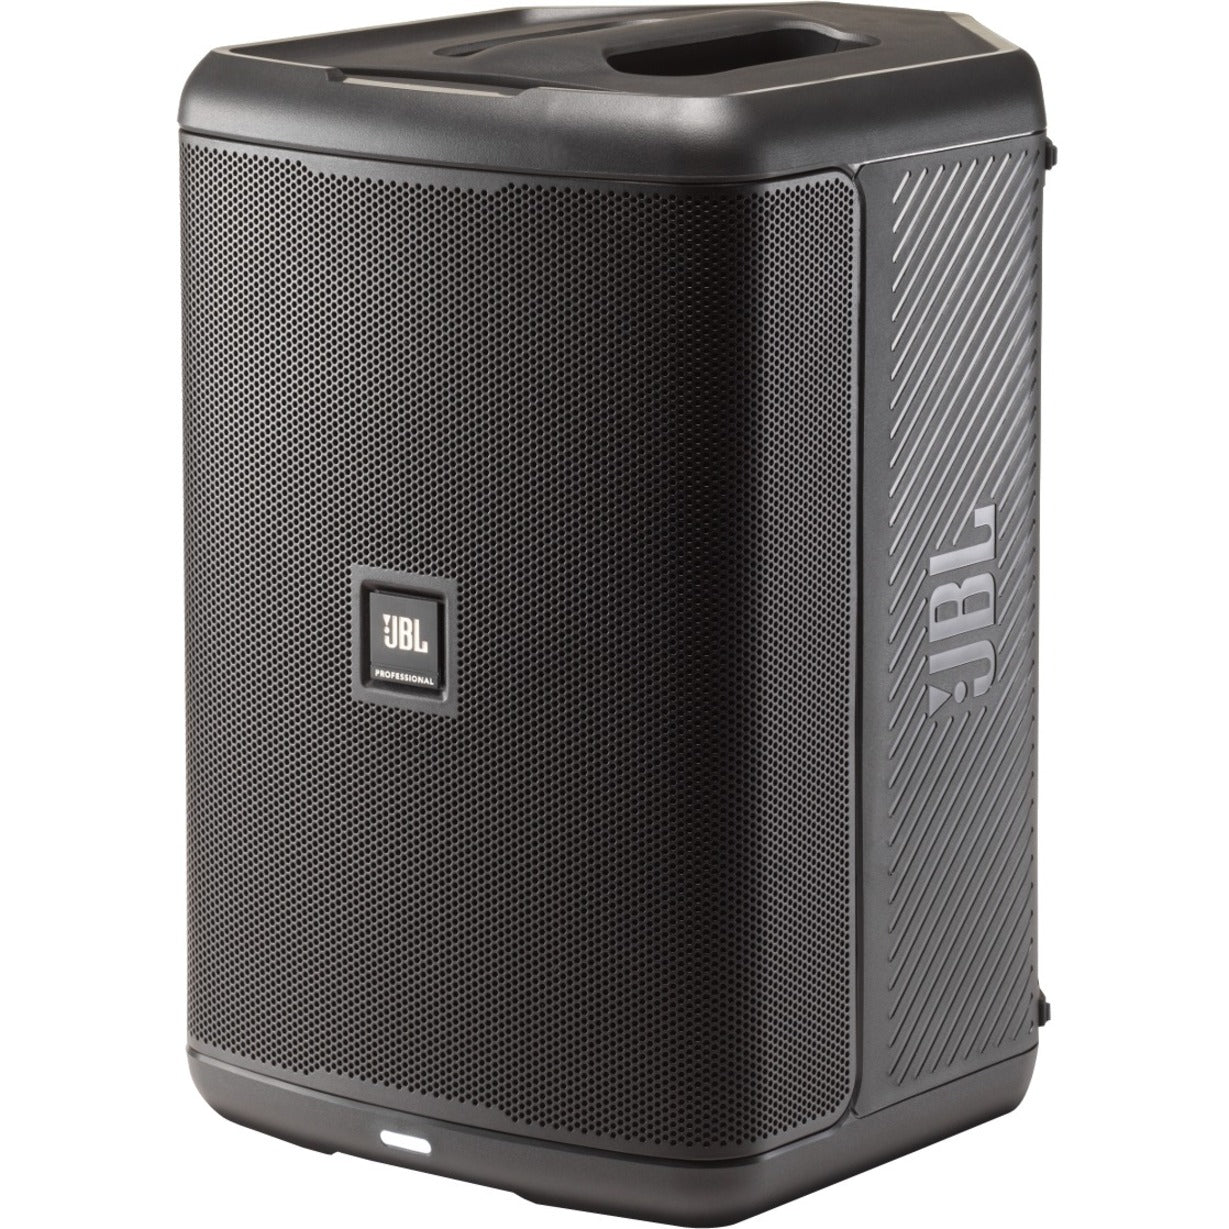 JBL EON ONE COMPACT-NA EON ONE Compact All-in-One Rechargeable Personal PA、ポータブルBluetoothスピーカー、12時間のバッテリー寿命 JBL（ジェイビーエル） EON ONE Compact